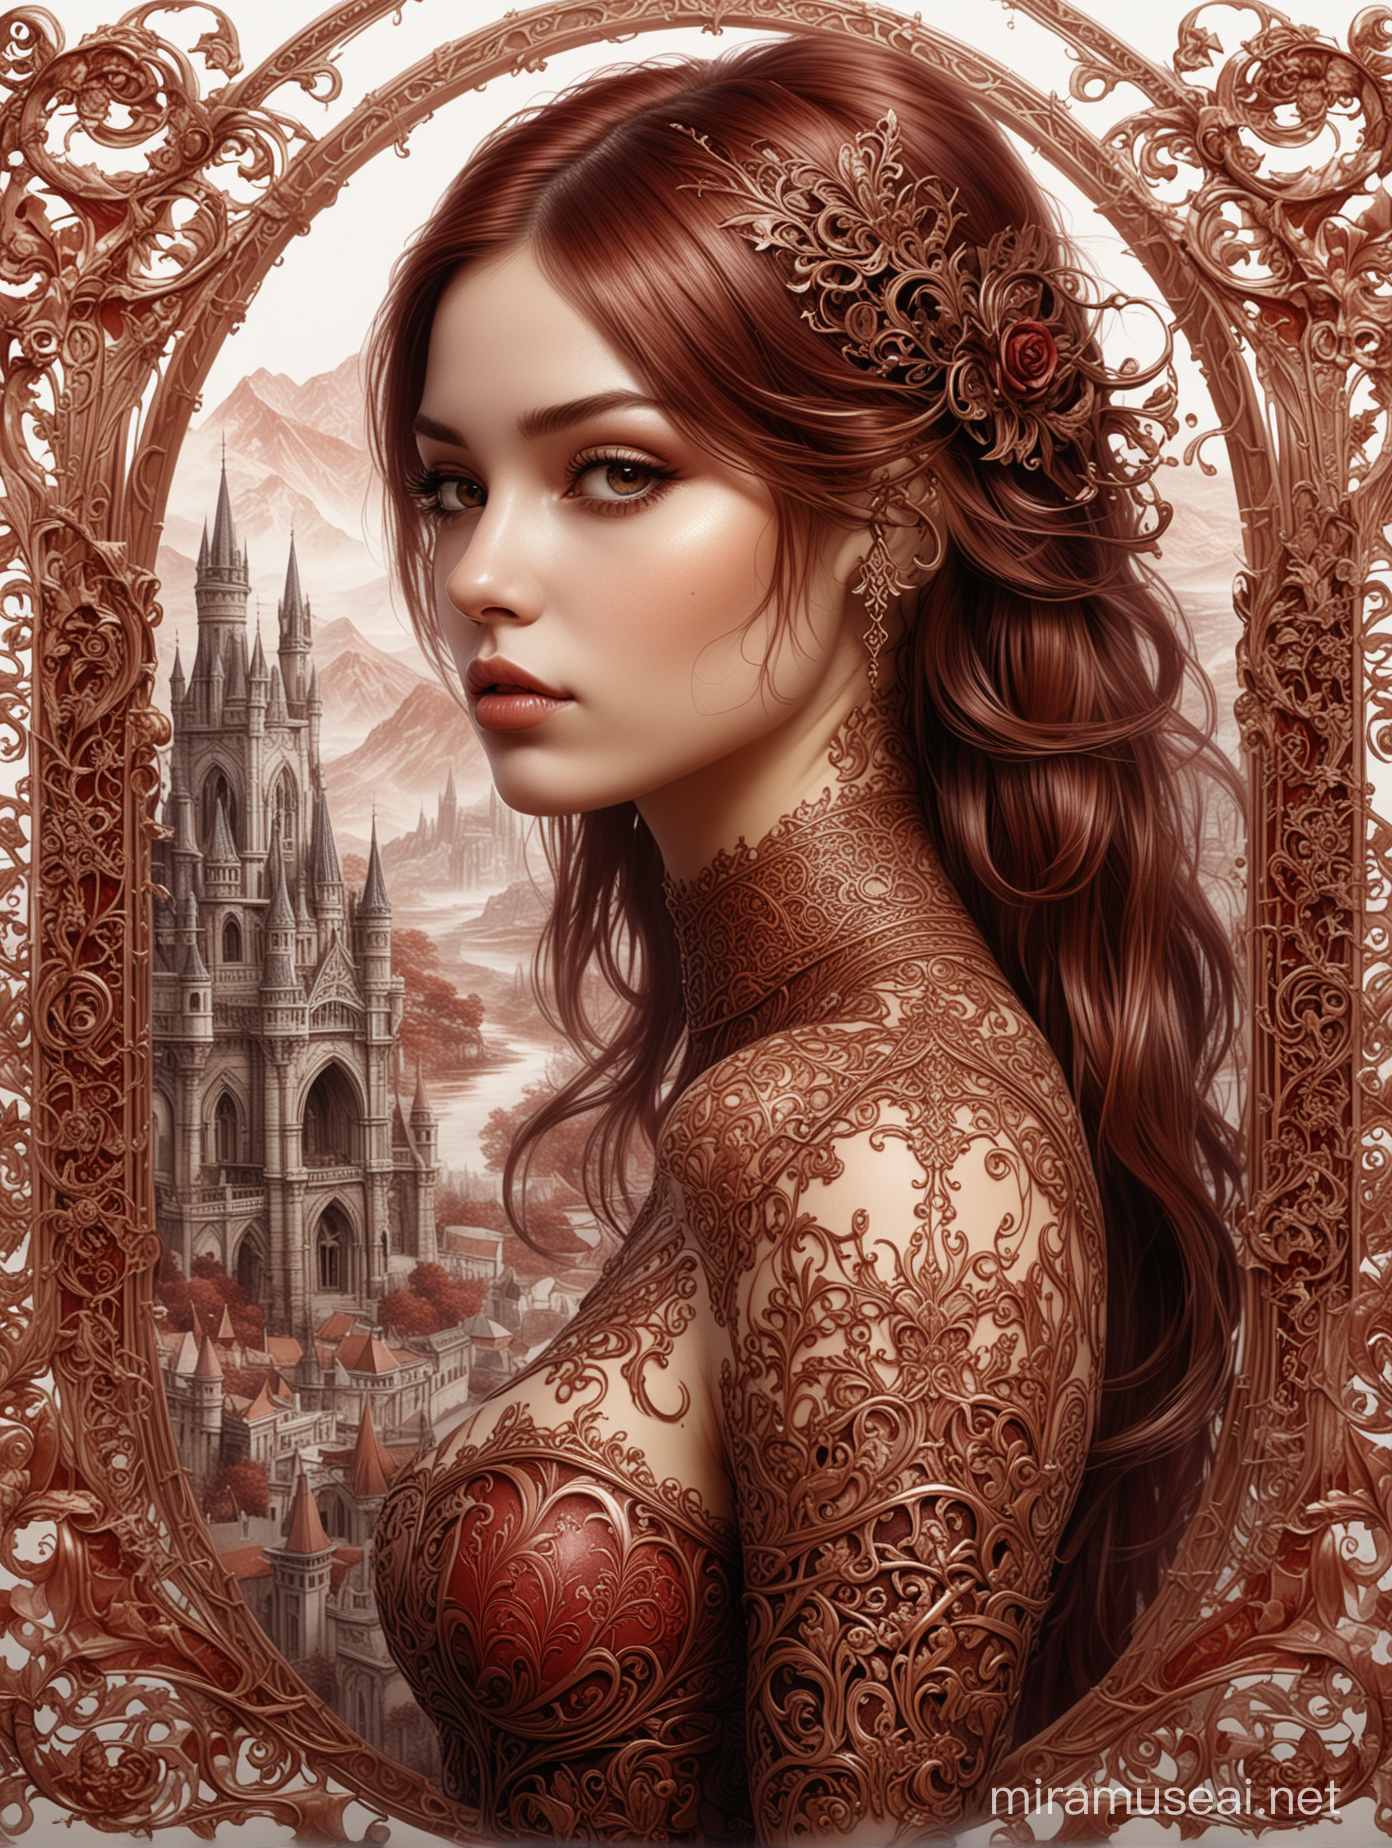 Beautiful girl with realistic tattoo design of a fantasy scenery, gothic ornamentation, intricate filigree metal design, in crimson and bronze, layered translucency, white background, high resolution